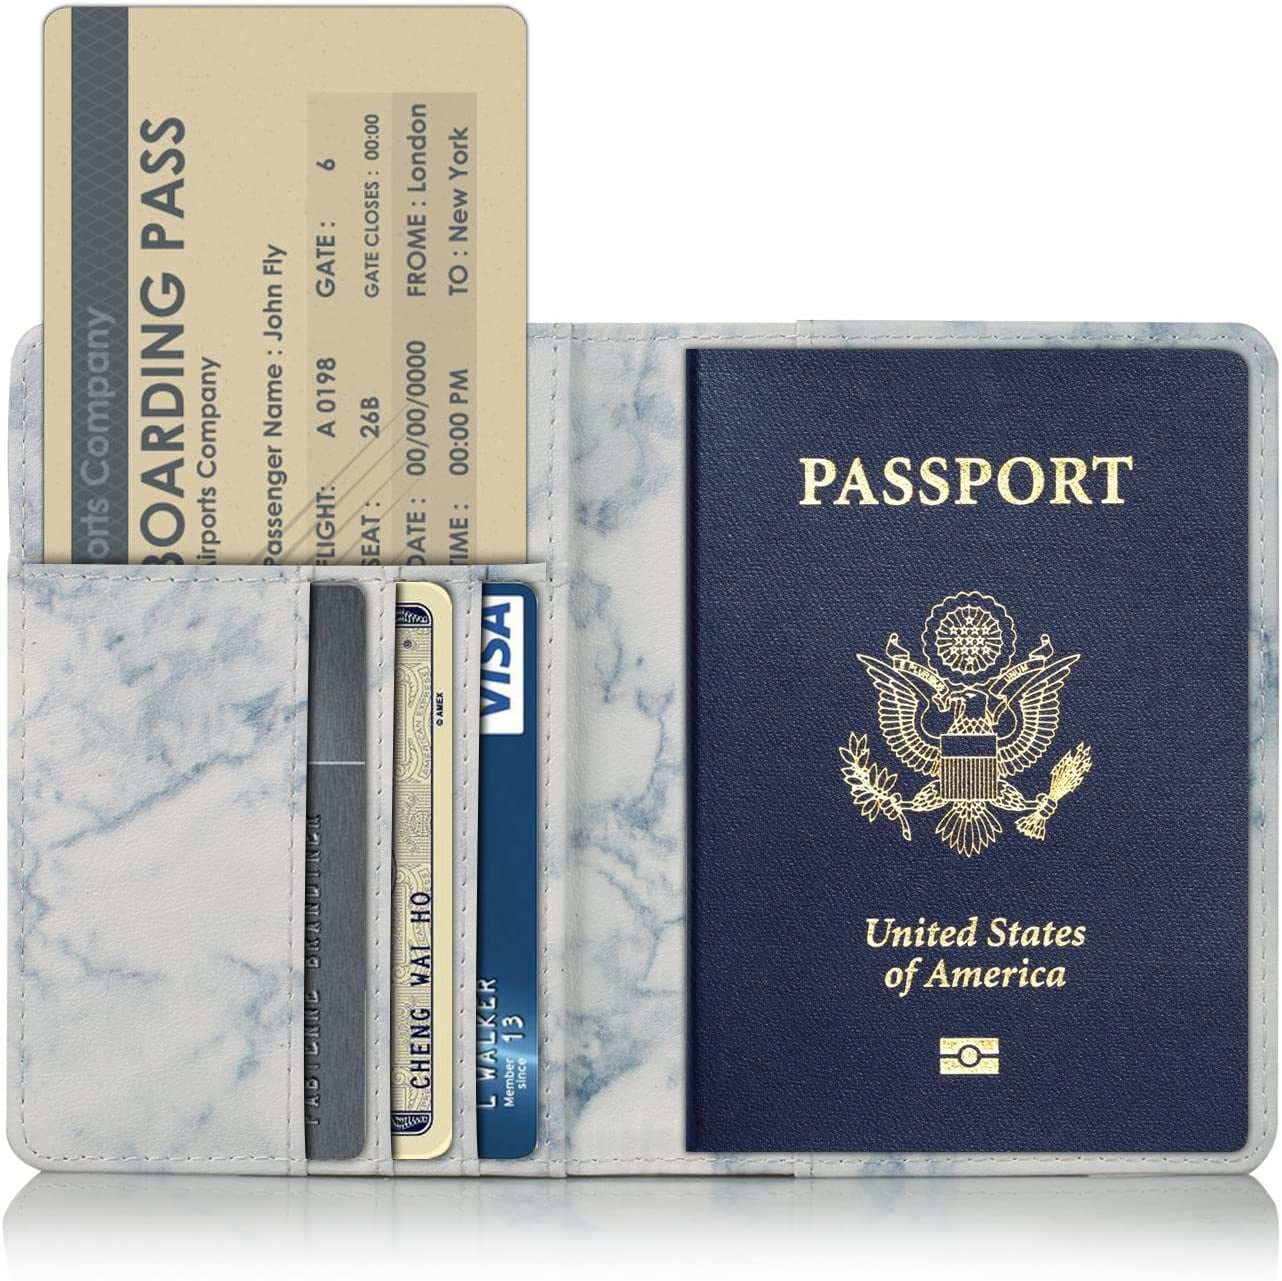 Al1017 ID Pop up Wallet Credit Gift Fashion Passport Holders Place